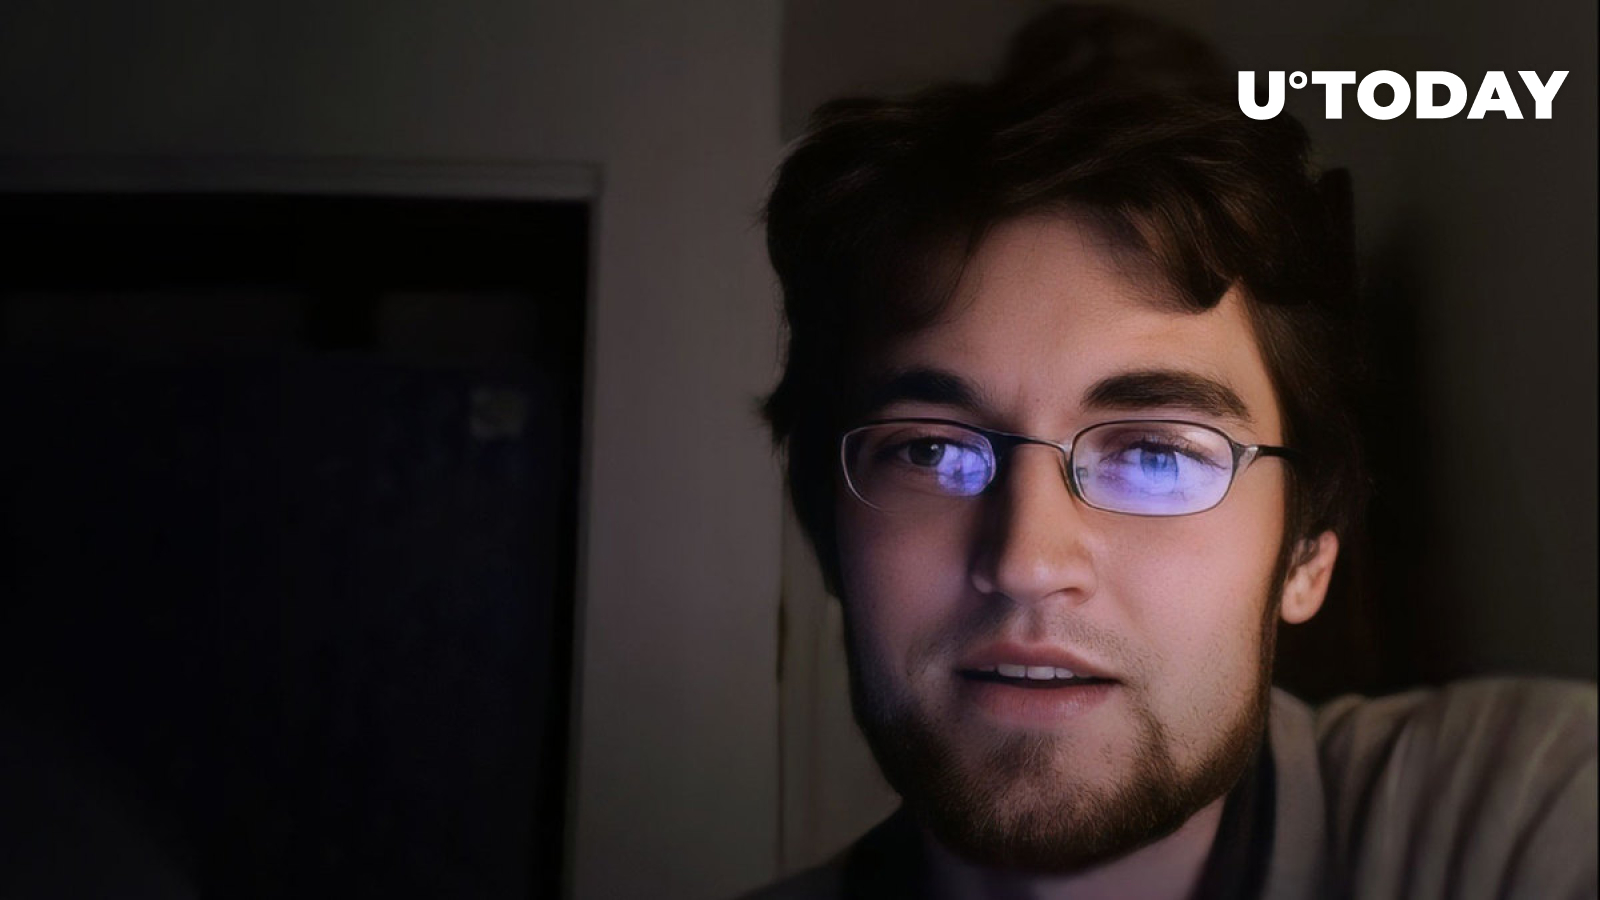 Silk Road Founder Ross Ulbricht Begins His 10th Year in Prison